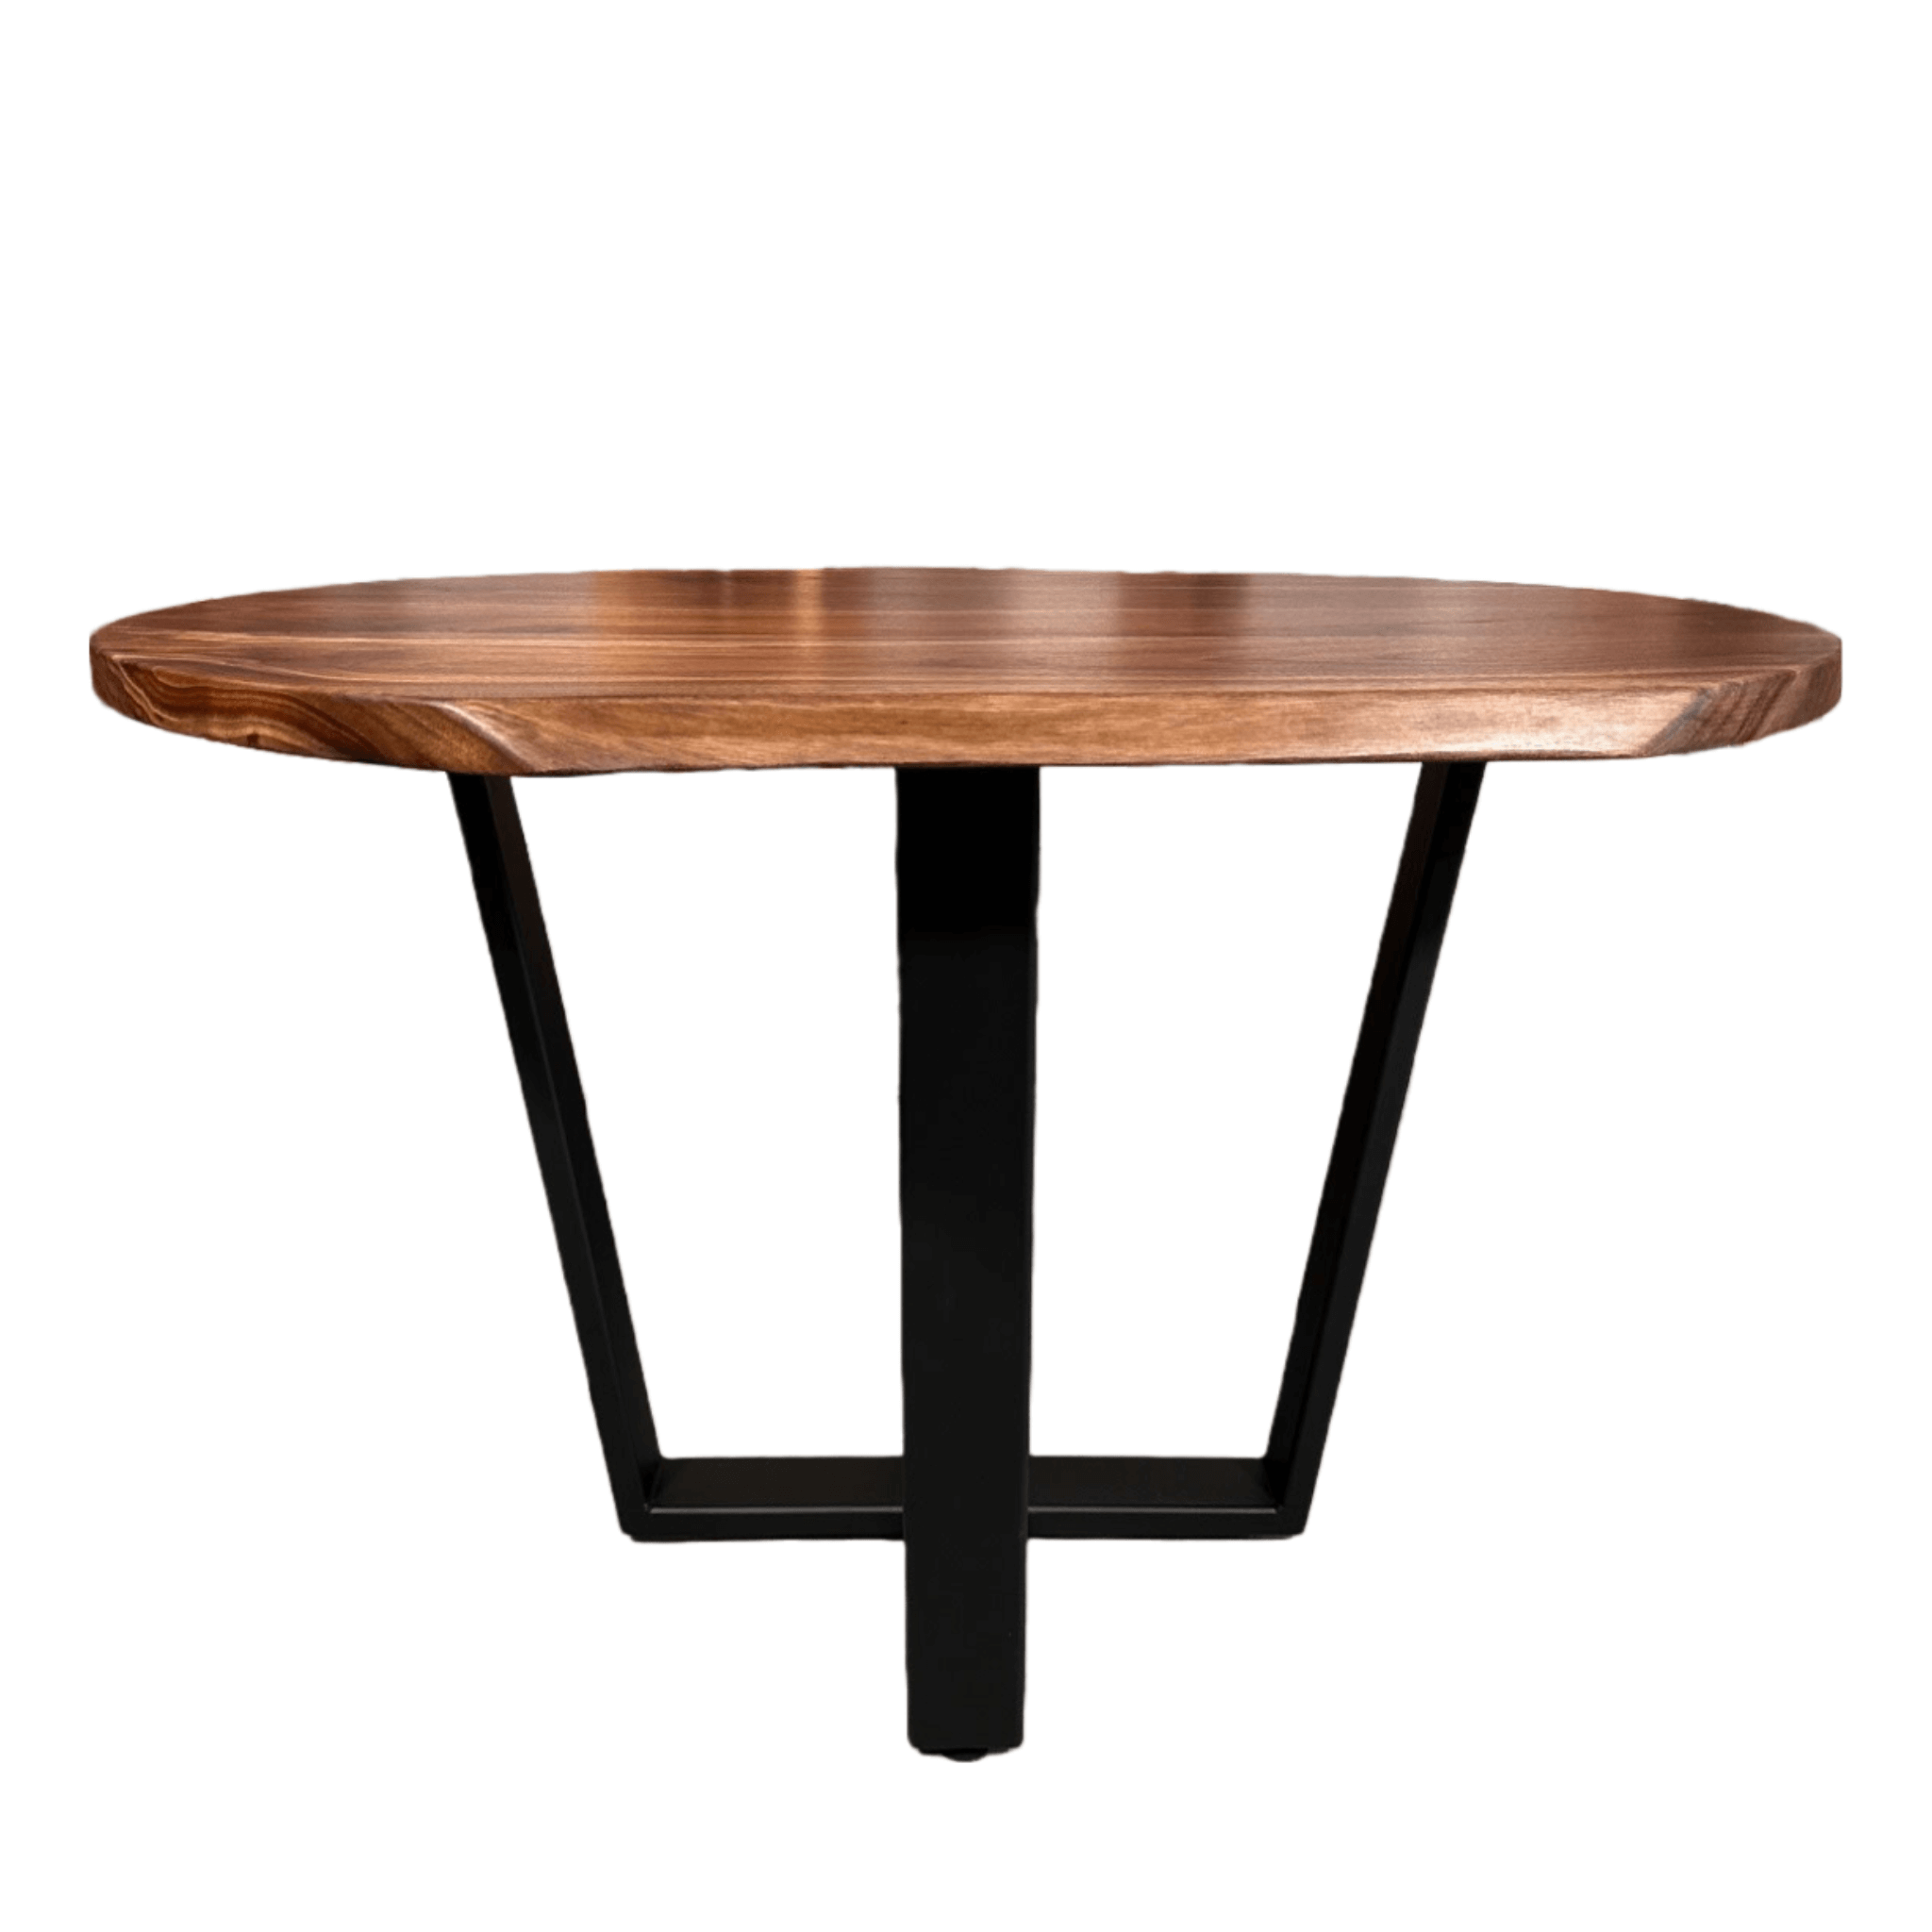 Live edge walnut round dining table. Created by Urban Industrial Design. 